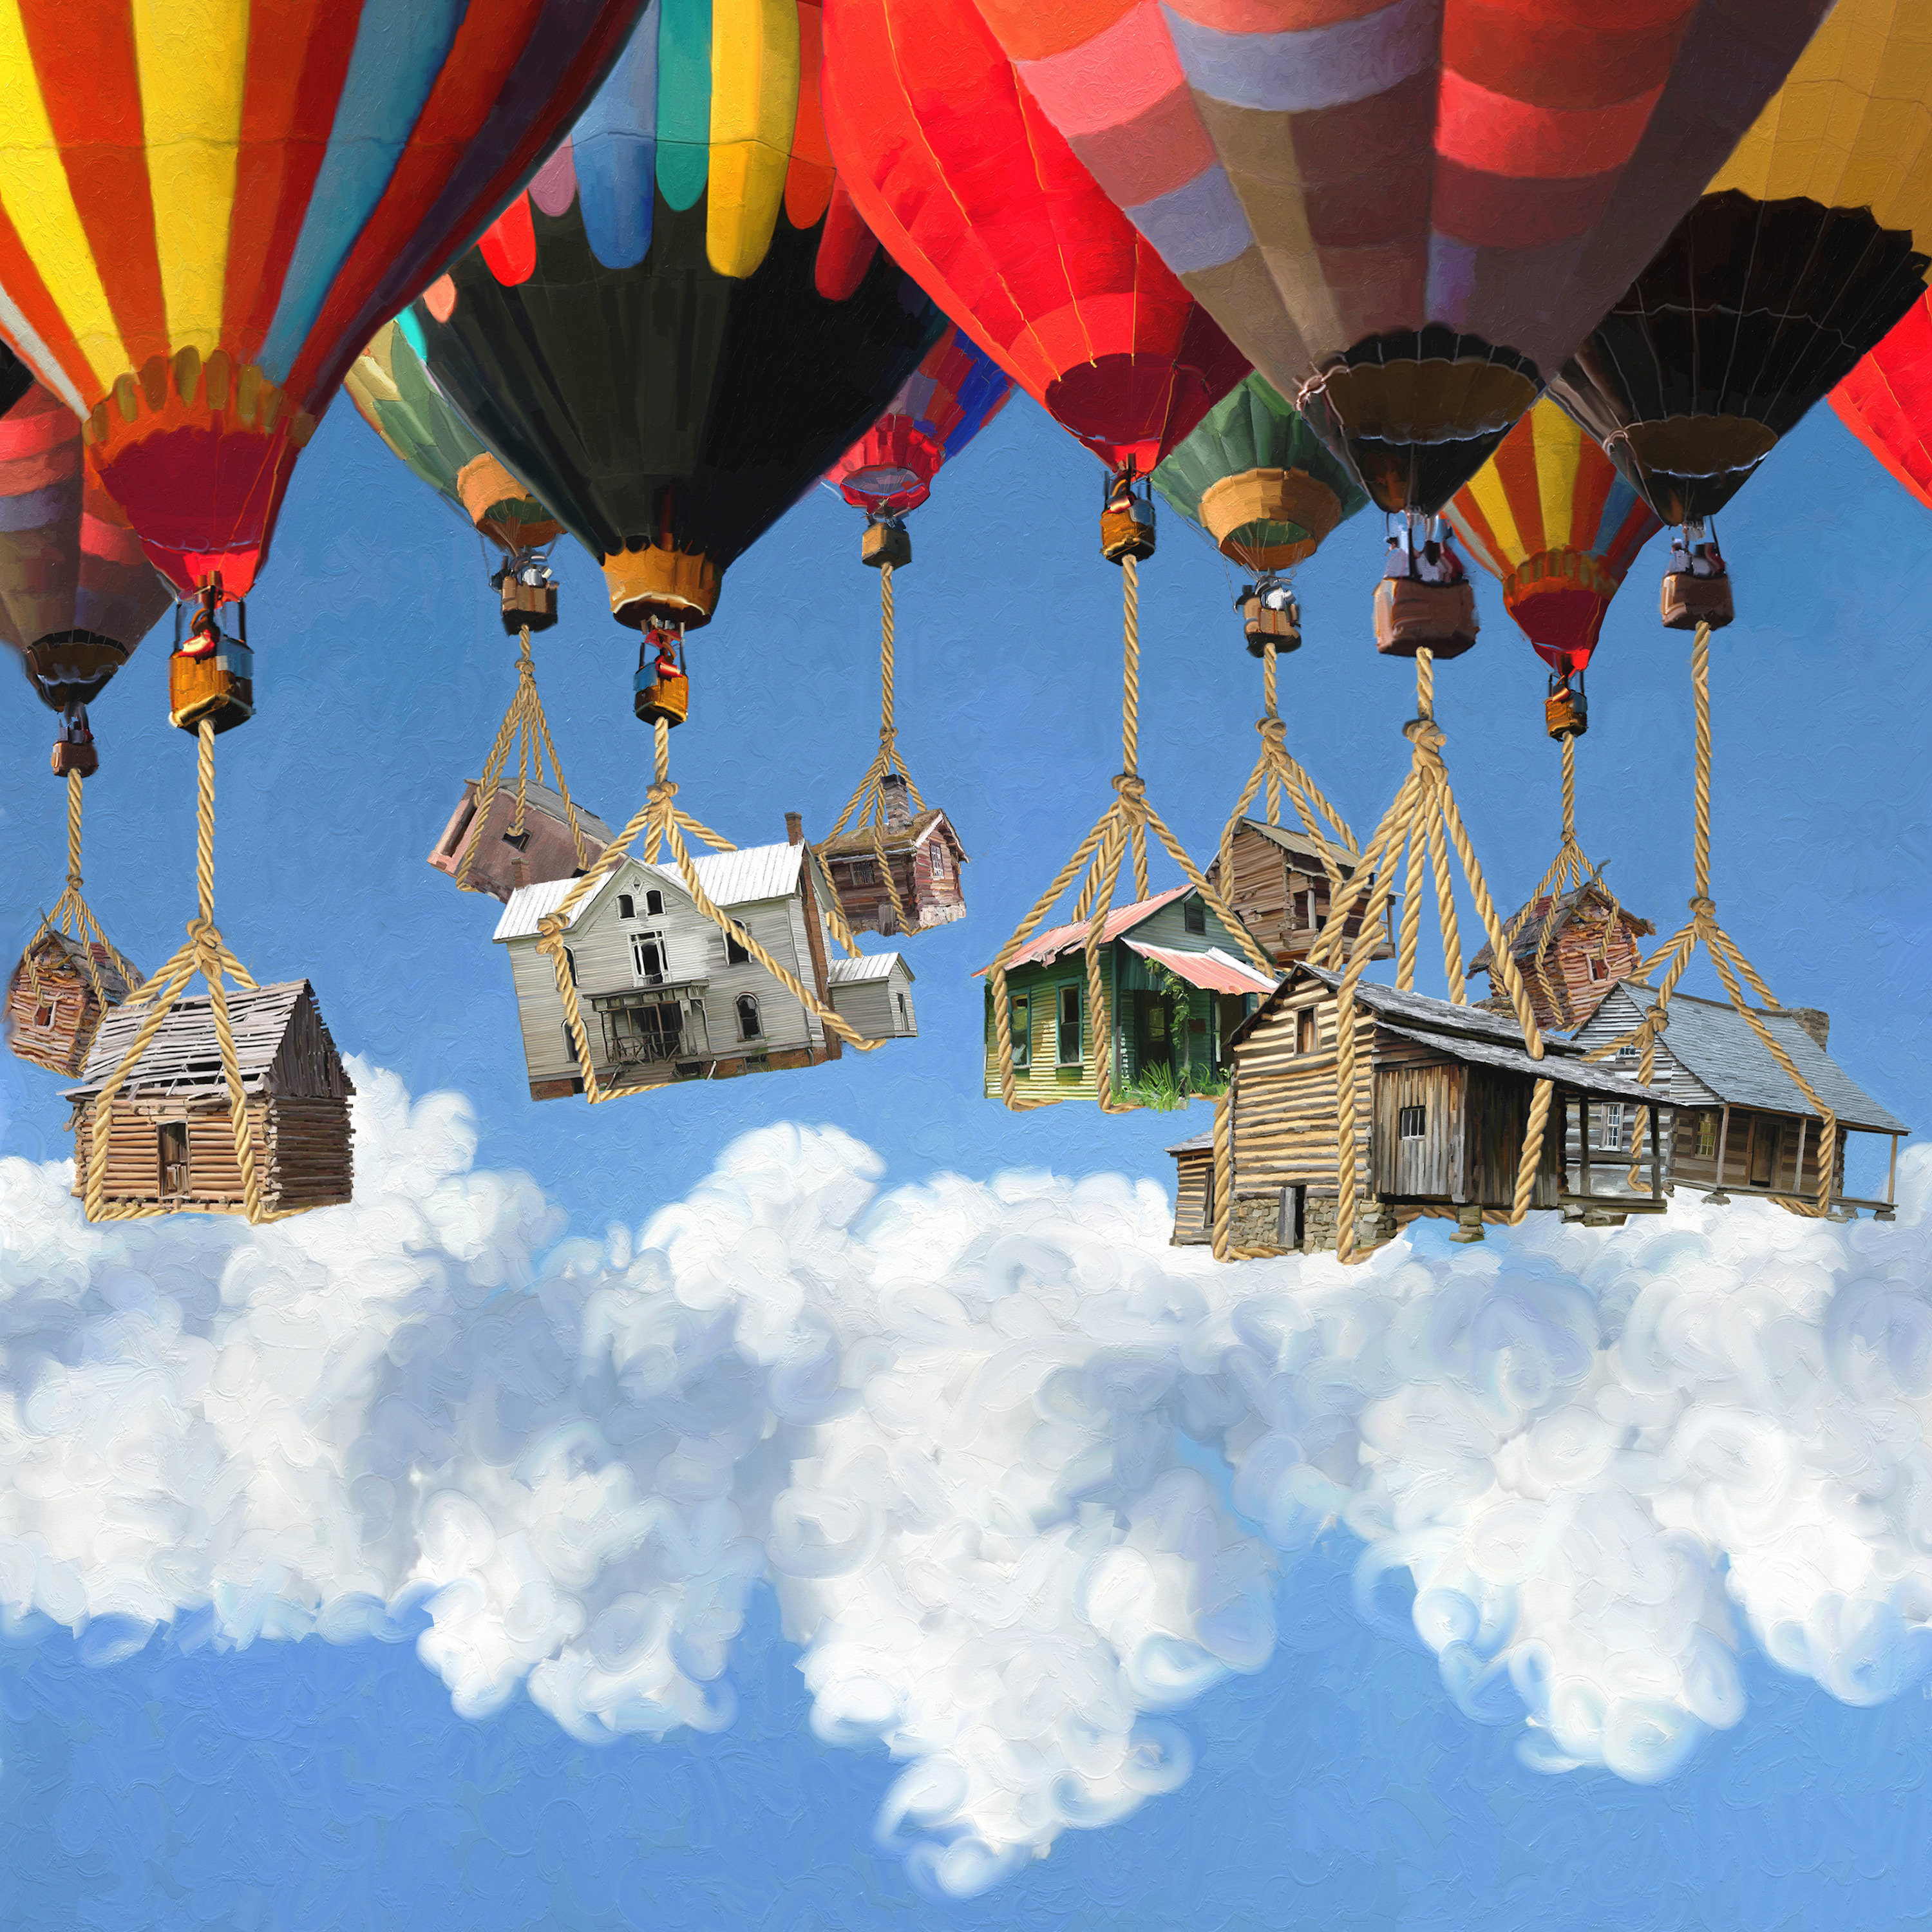 Balloon clouds vcbo2l